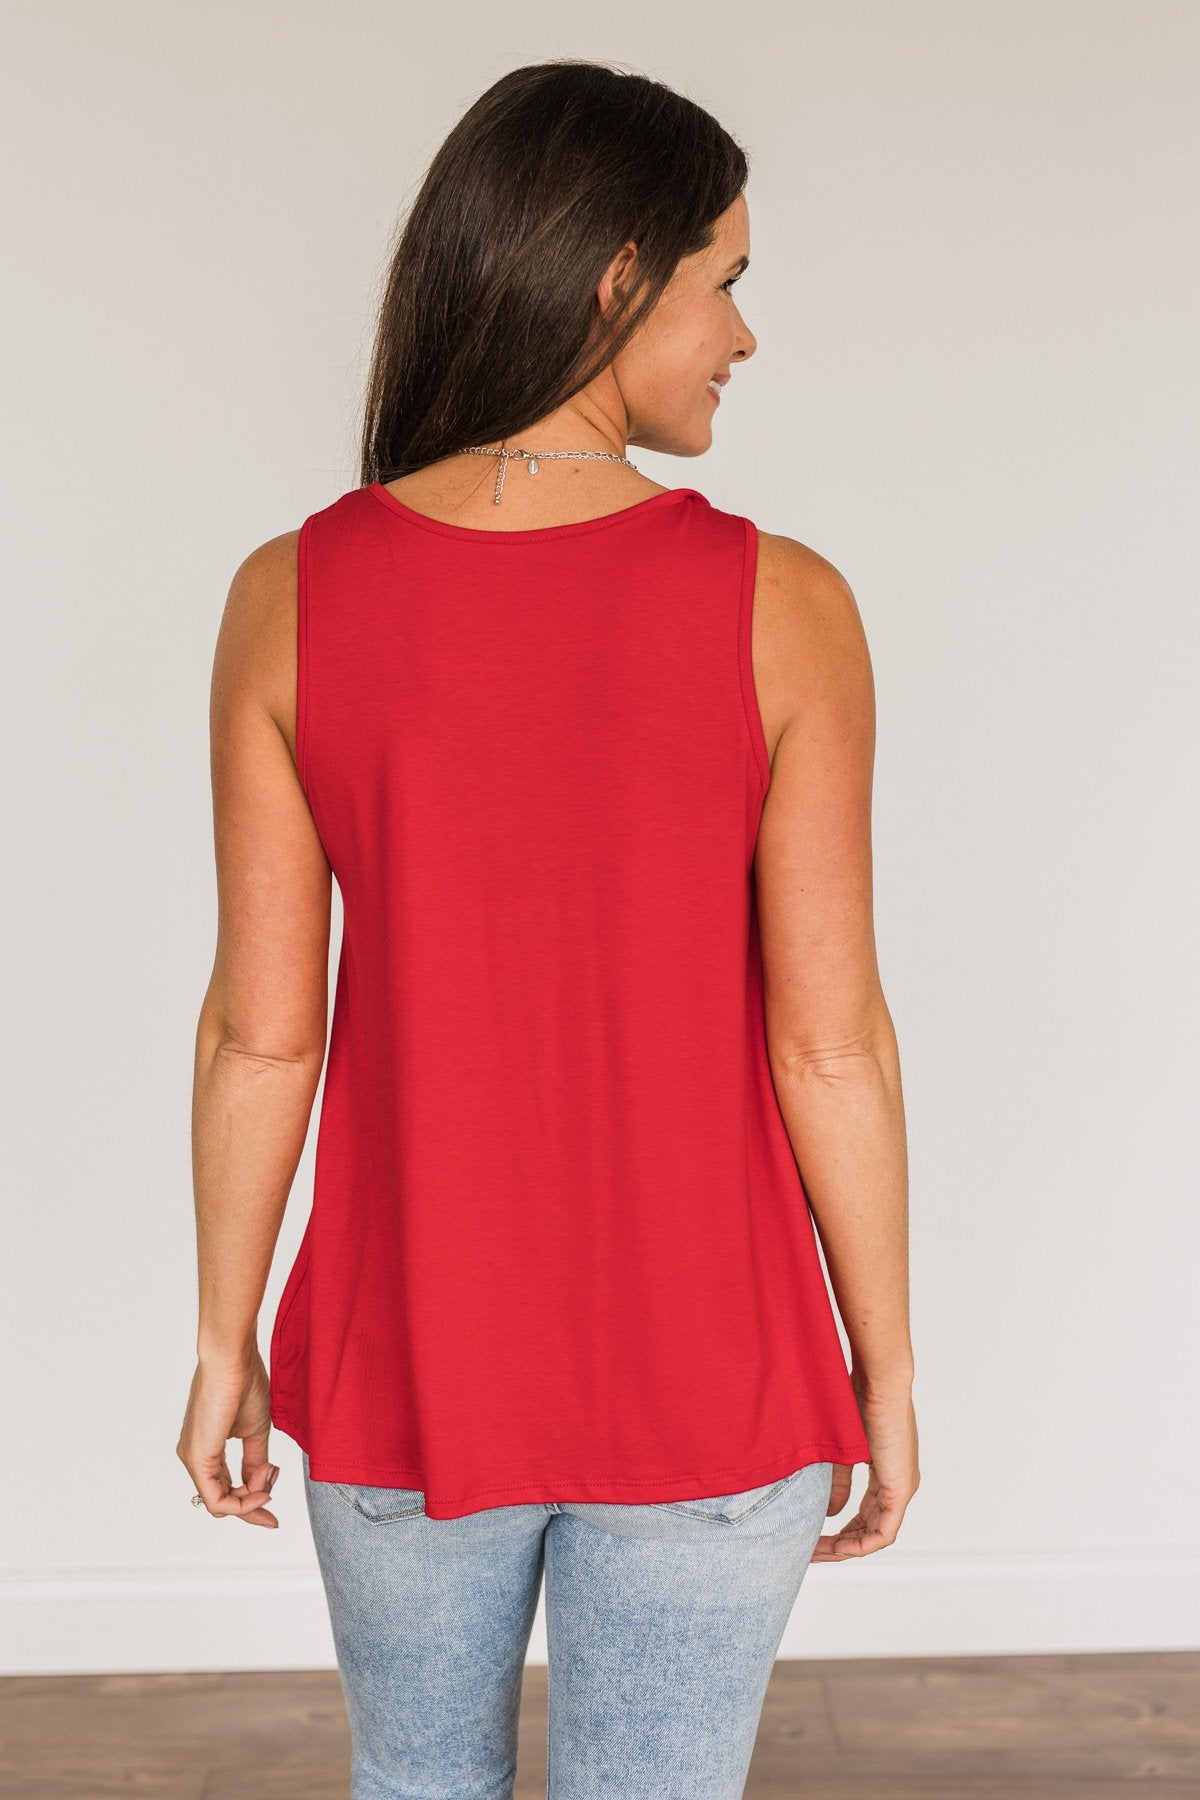 A Shining Moment Lace Tank Top- Red